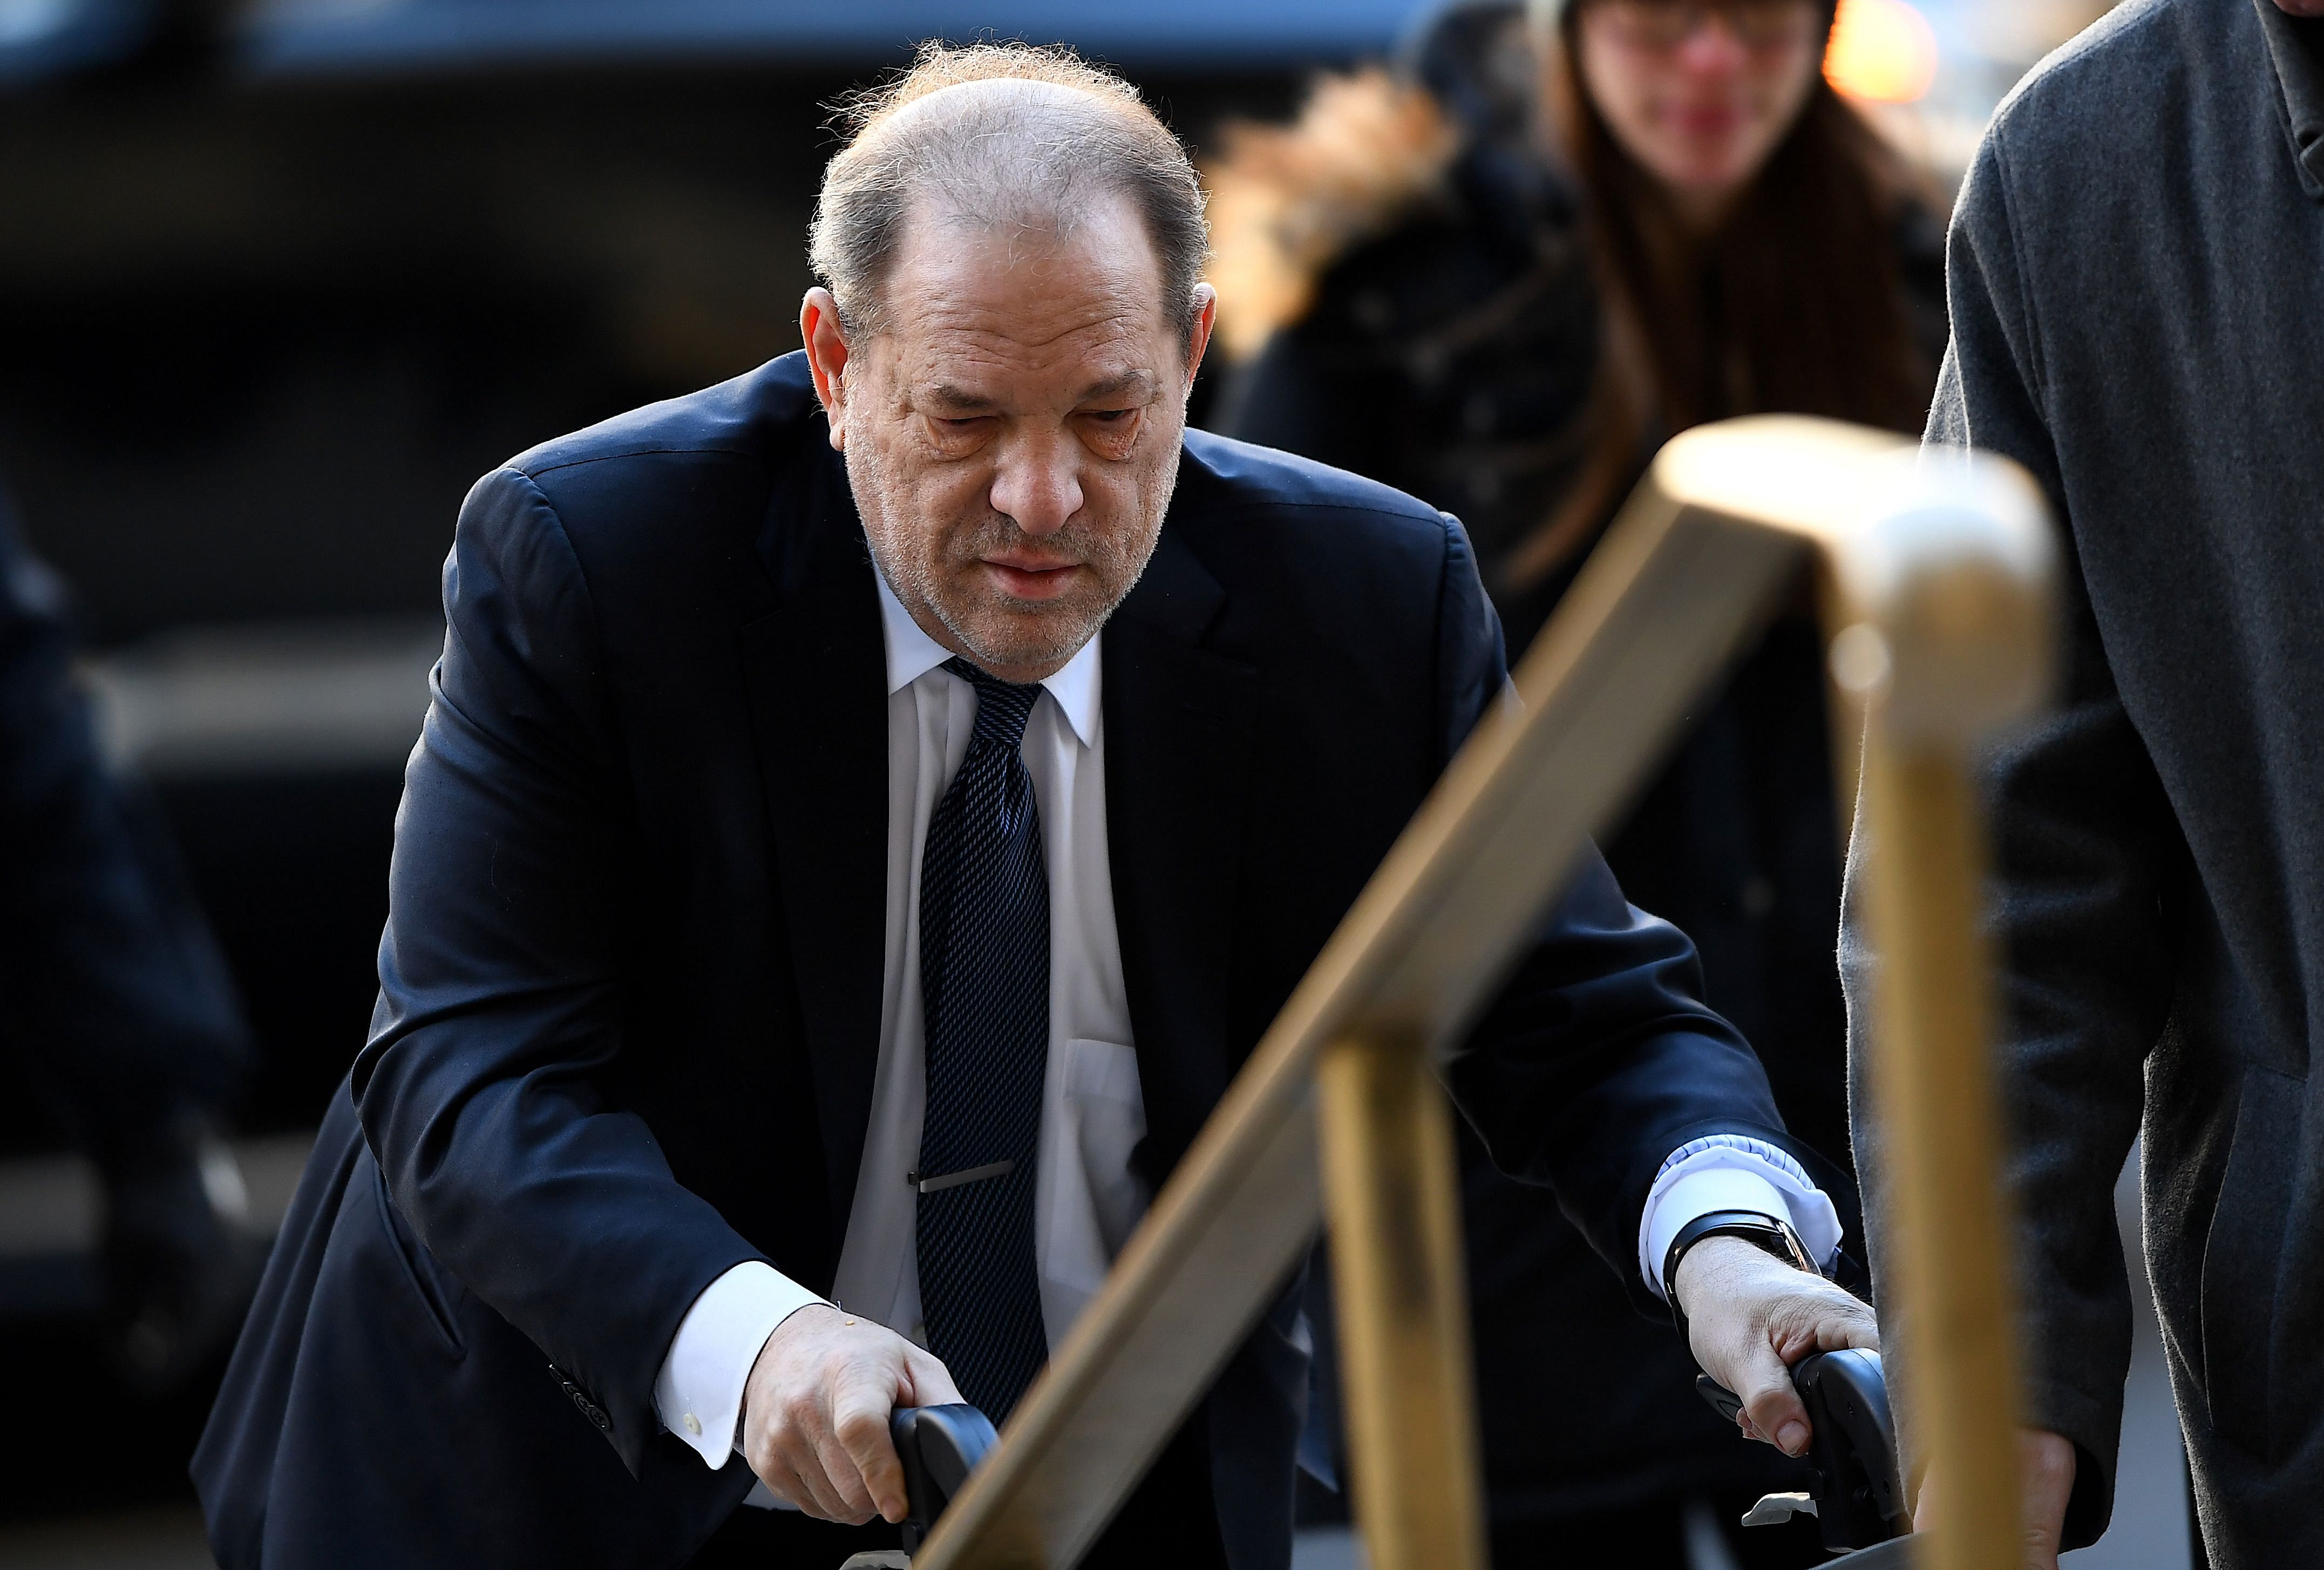 More than 100 women have accused Weinstein of sexual misconduct stretching back decades. He has denied the allegations, saying any sex was consensual. (Credit: AFP Photo)